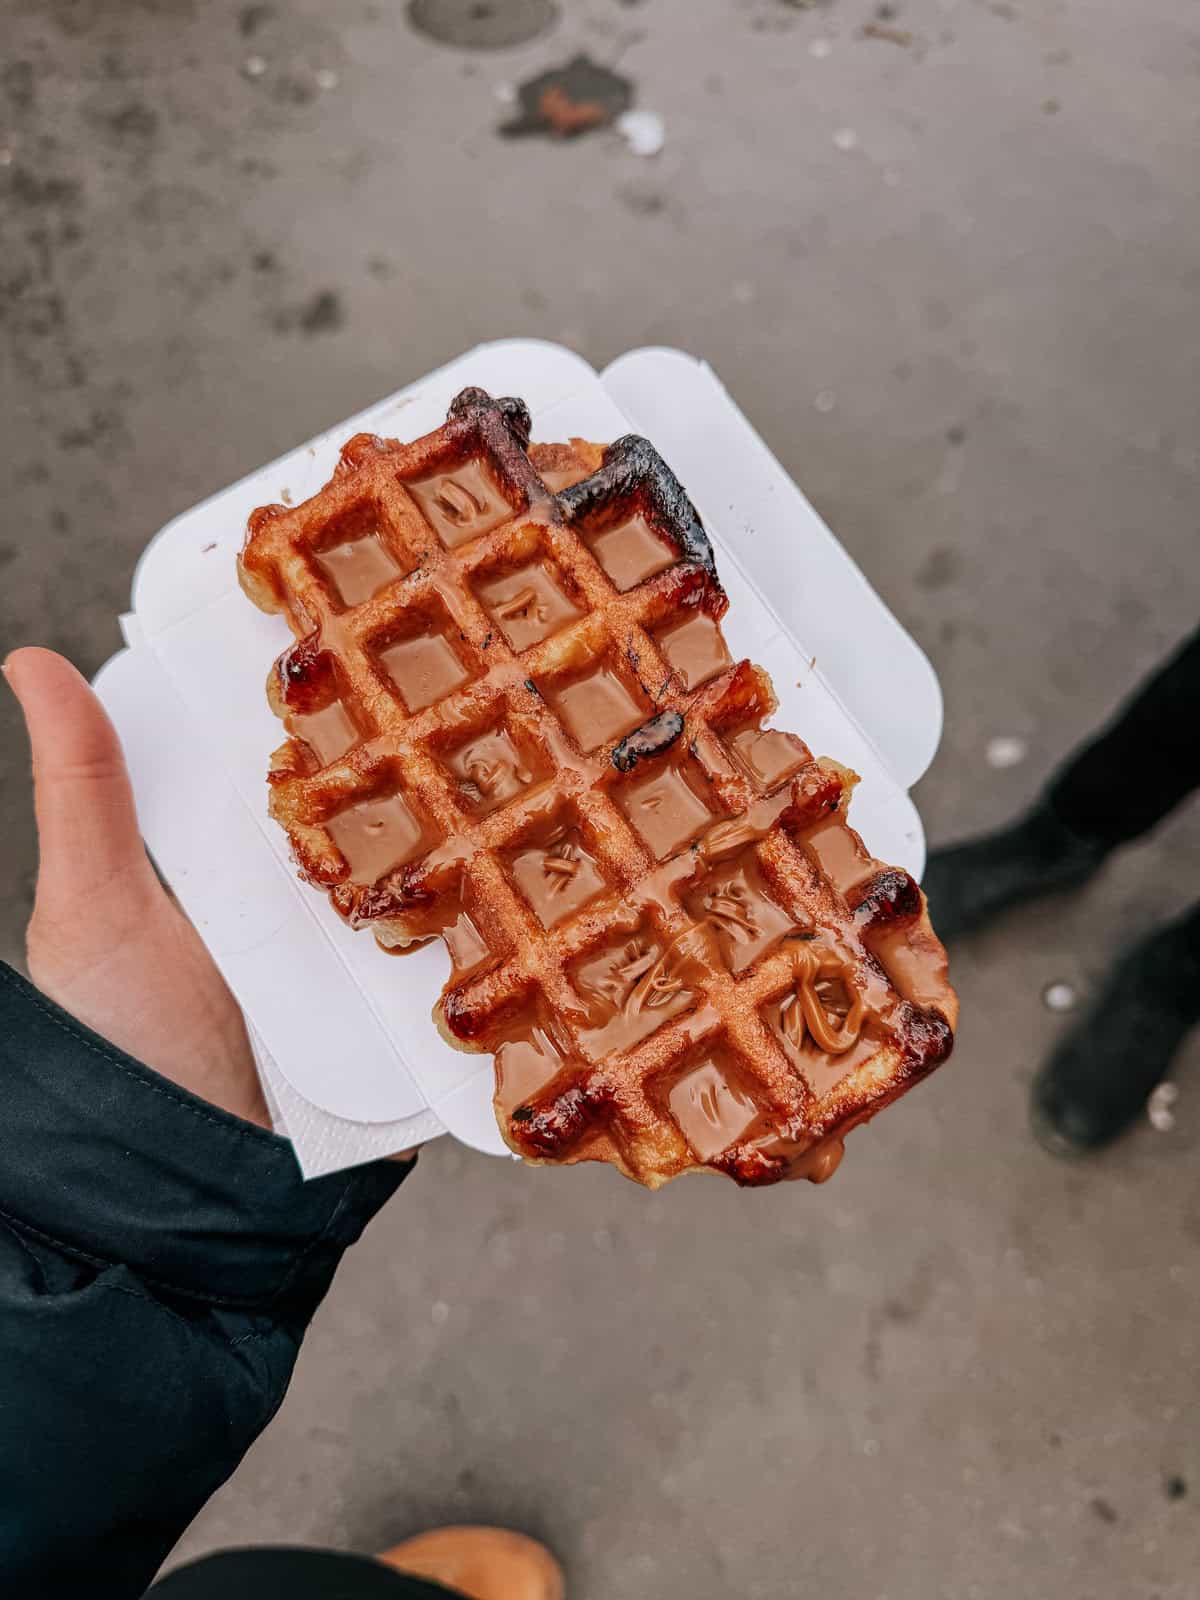 A close-up of a caramel-topped waffle, held in a hand with the city street blurred in the background, showcasing a gooey caramel drizzle in the grid of the waffle